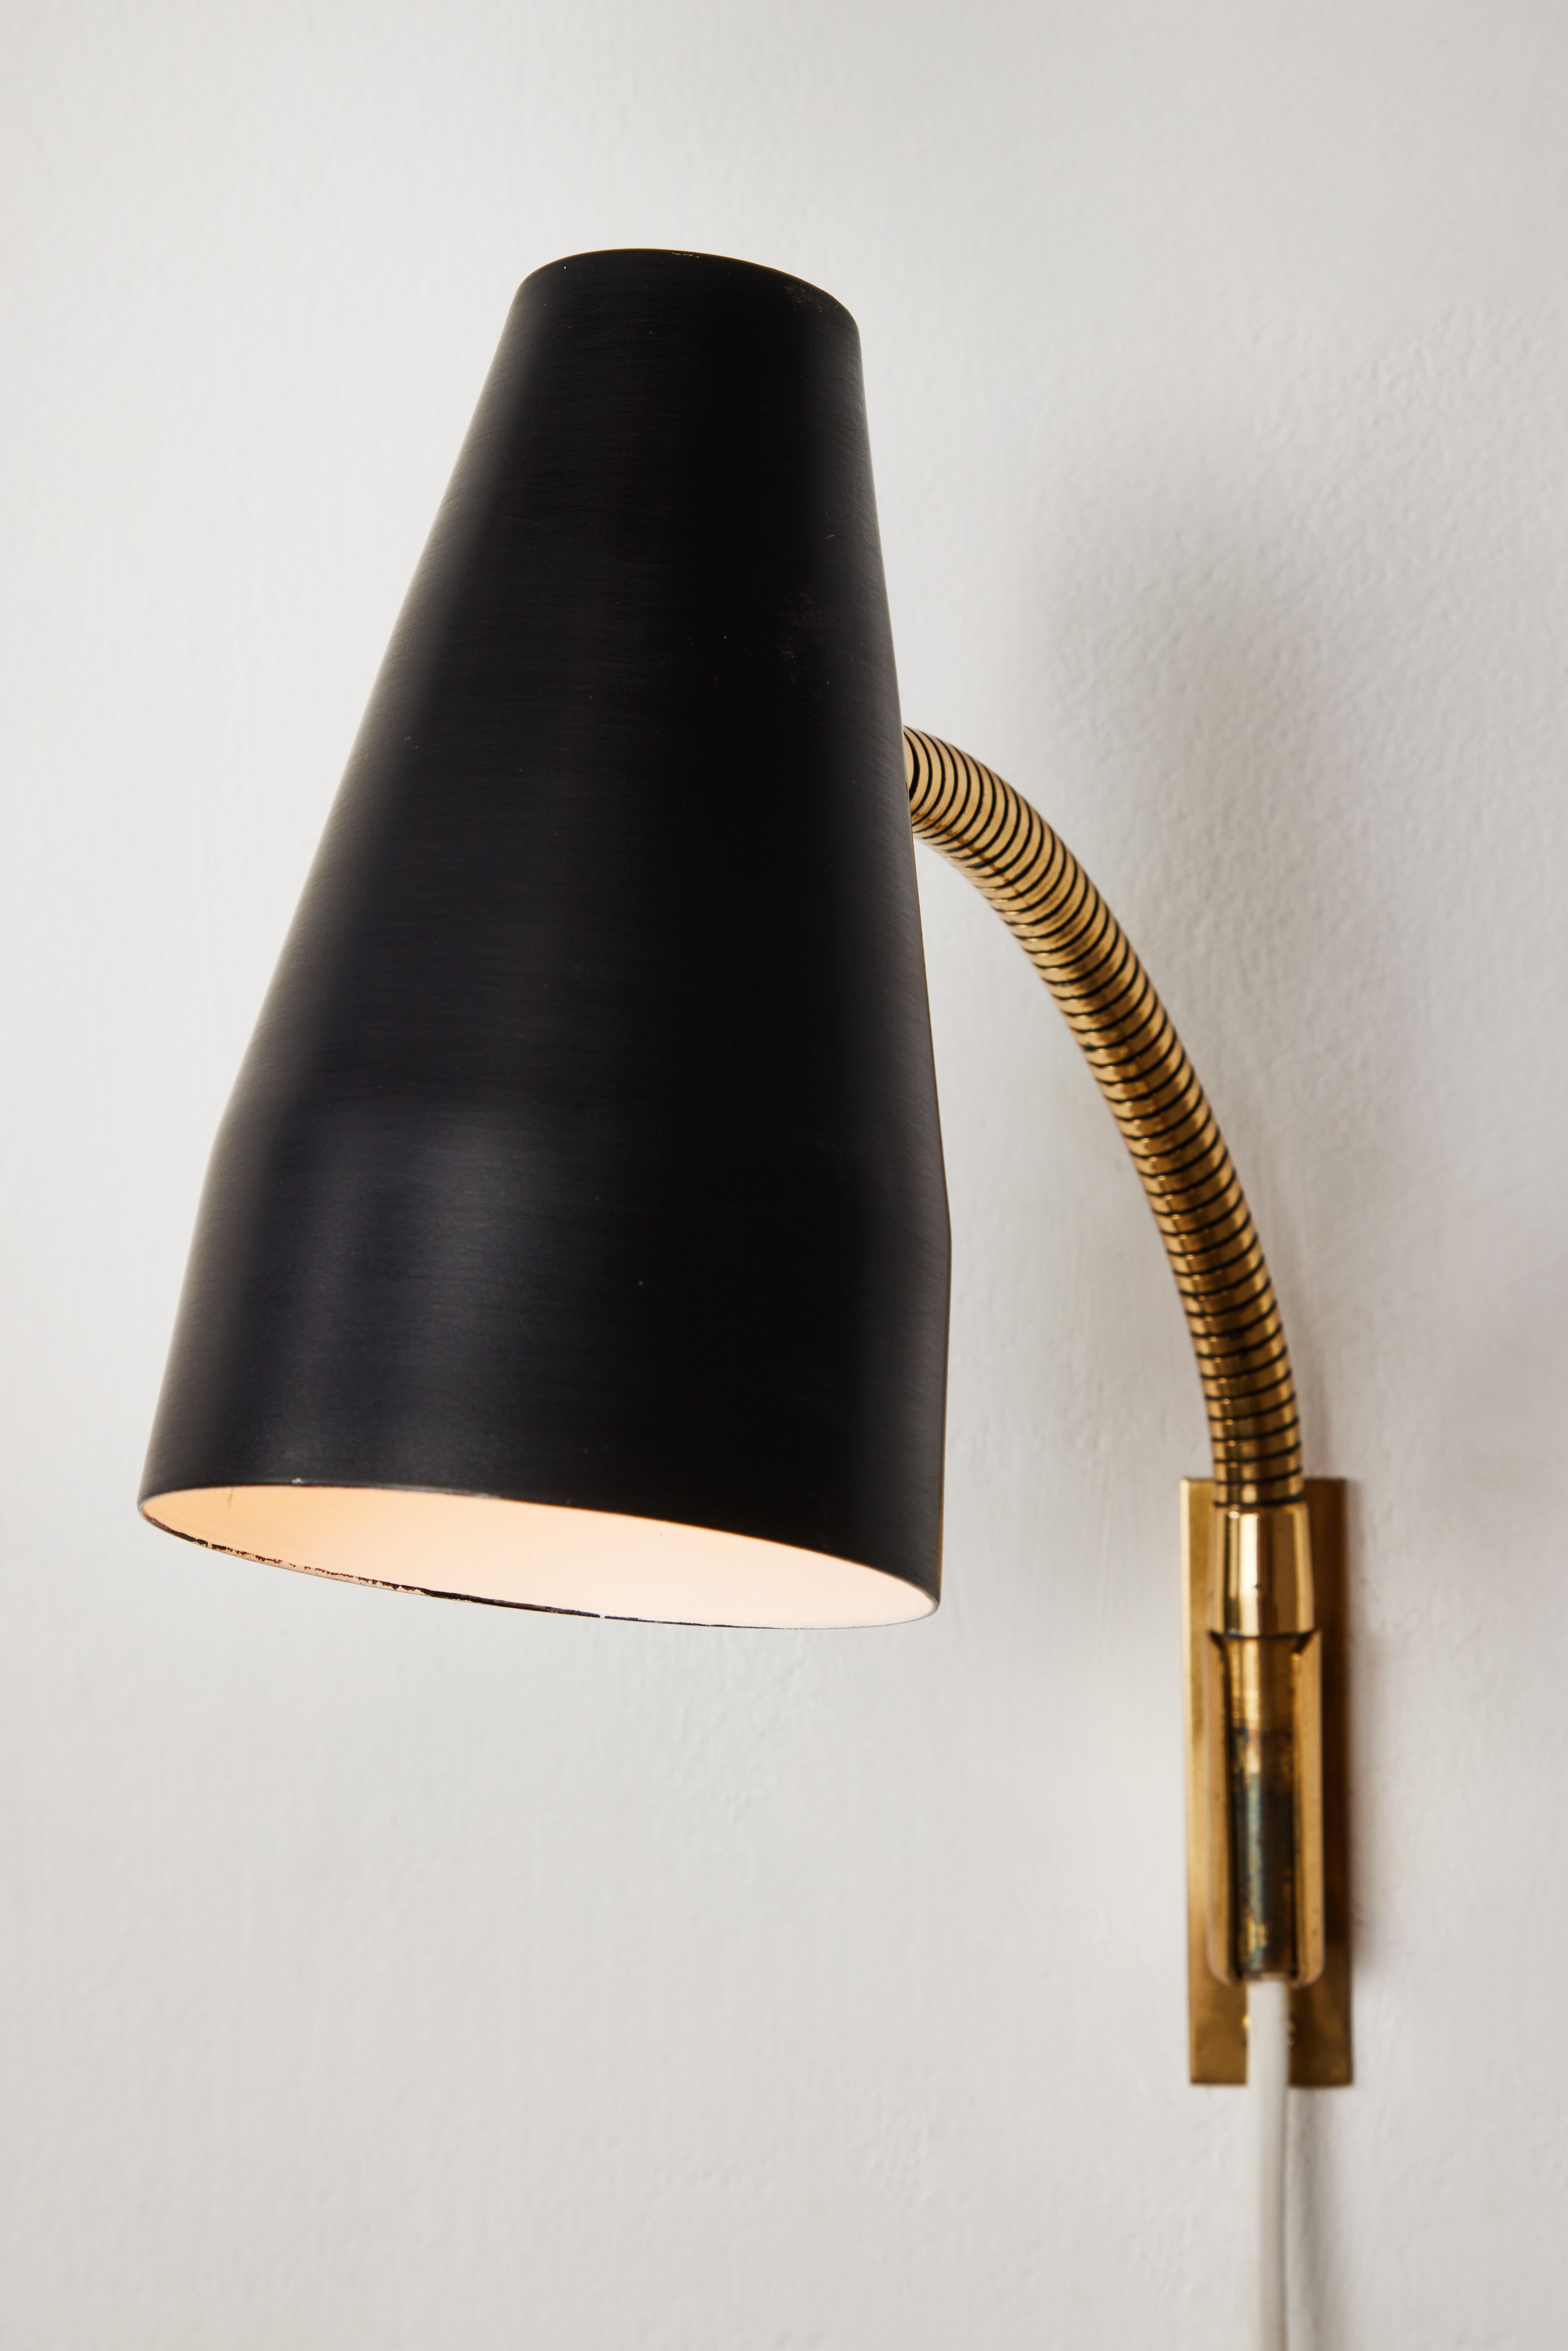 Pair of 1950s Lisa Johansson Pape Model #50-056/2 wall lights for Stockmann Orno. A highly versatile and adjustable pair of wall lights, the brass gooseneck arm with shade can be raised and lowered as well as rotated right and left. The articulating